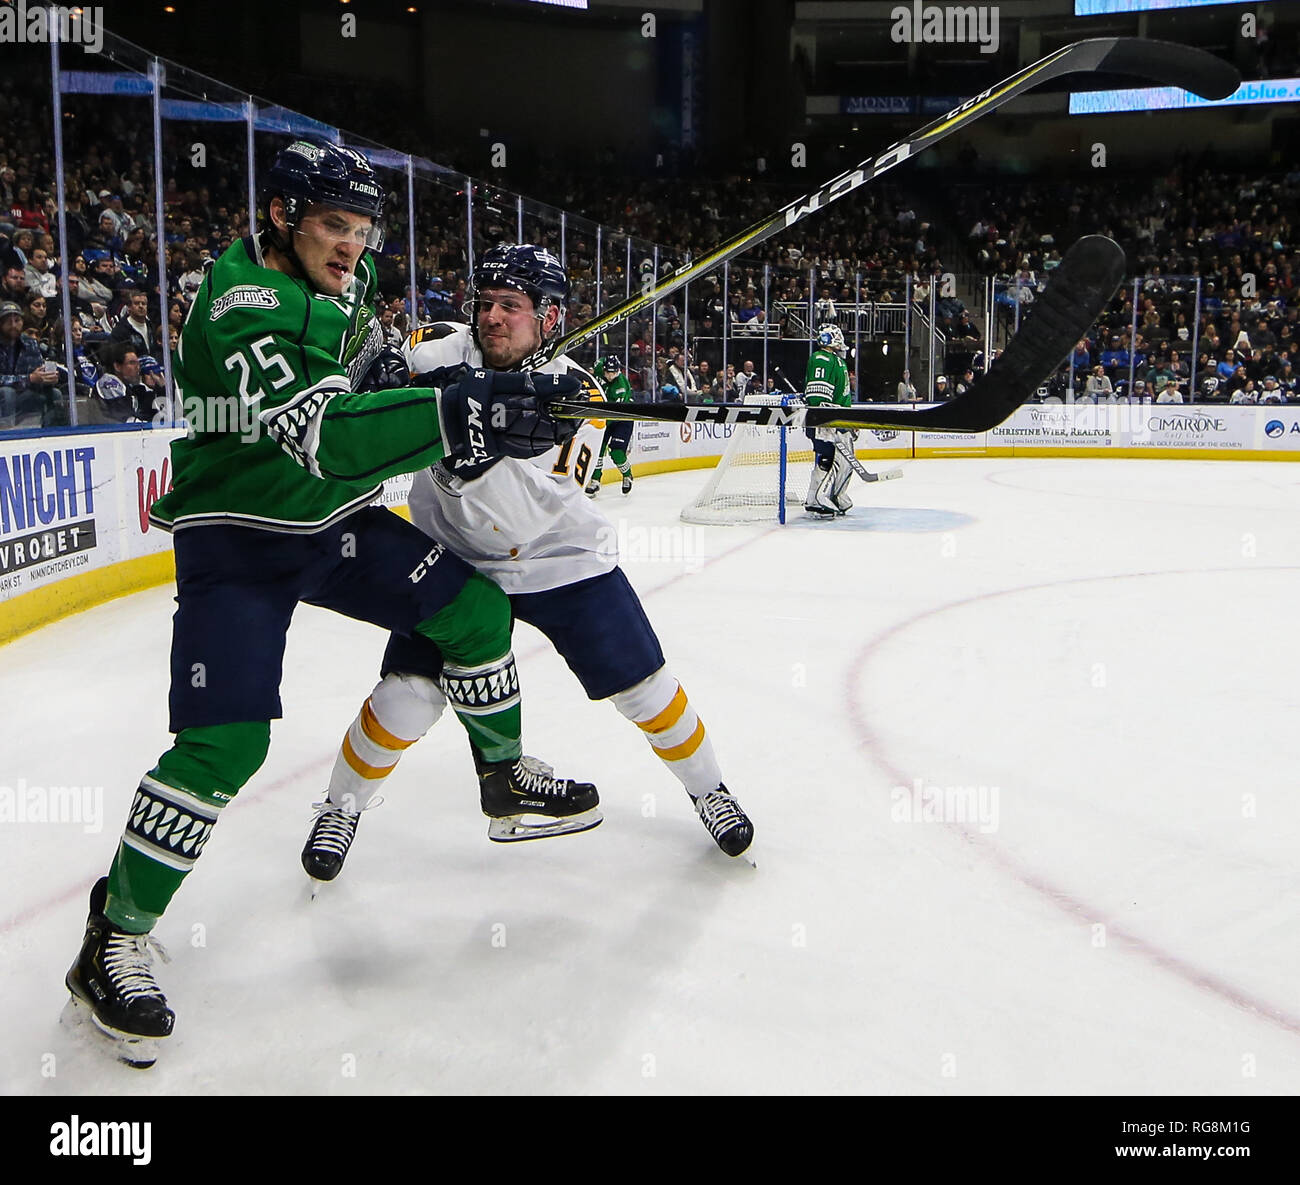 Florida Everblades forward John McCarron (25) checked by Jacksonville Icemen forward Cody Fowlie (19), right, during the first period of an ECHL professional hockey game at the Veterans Memorial Arena in Jacksonville, Fla., Saturday, Jan. 26, 2019. (Gary Lloyd McCullough/Cal Sport Media) Stock Photo